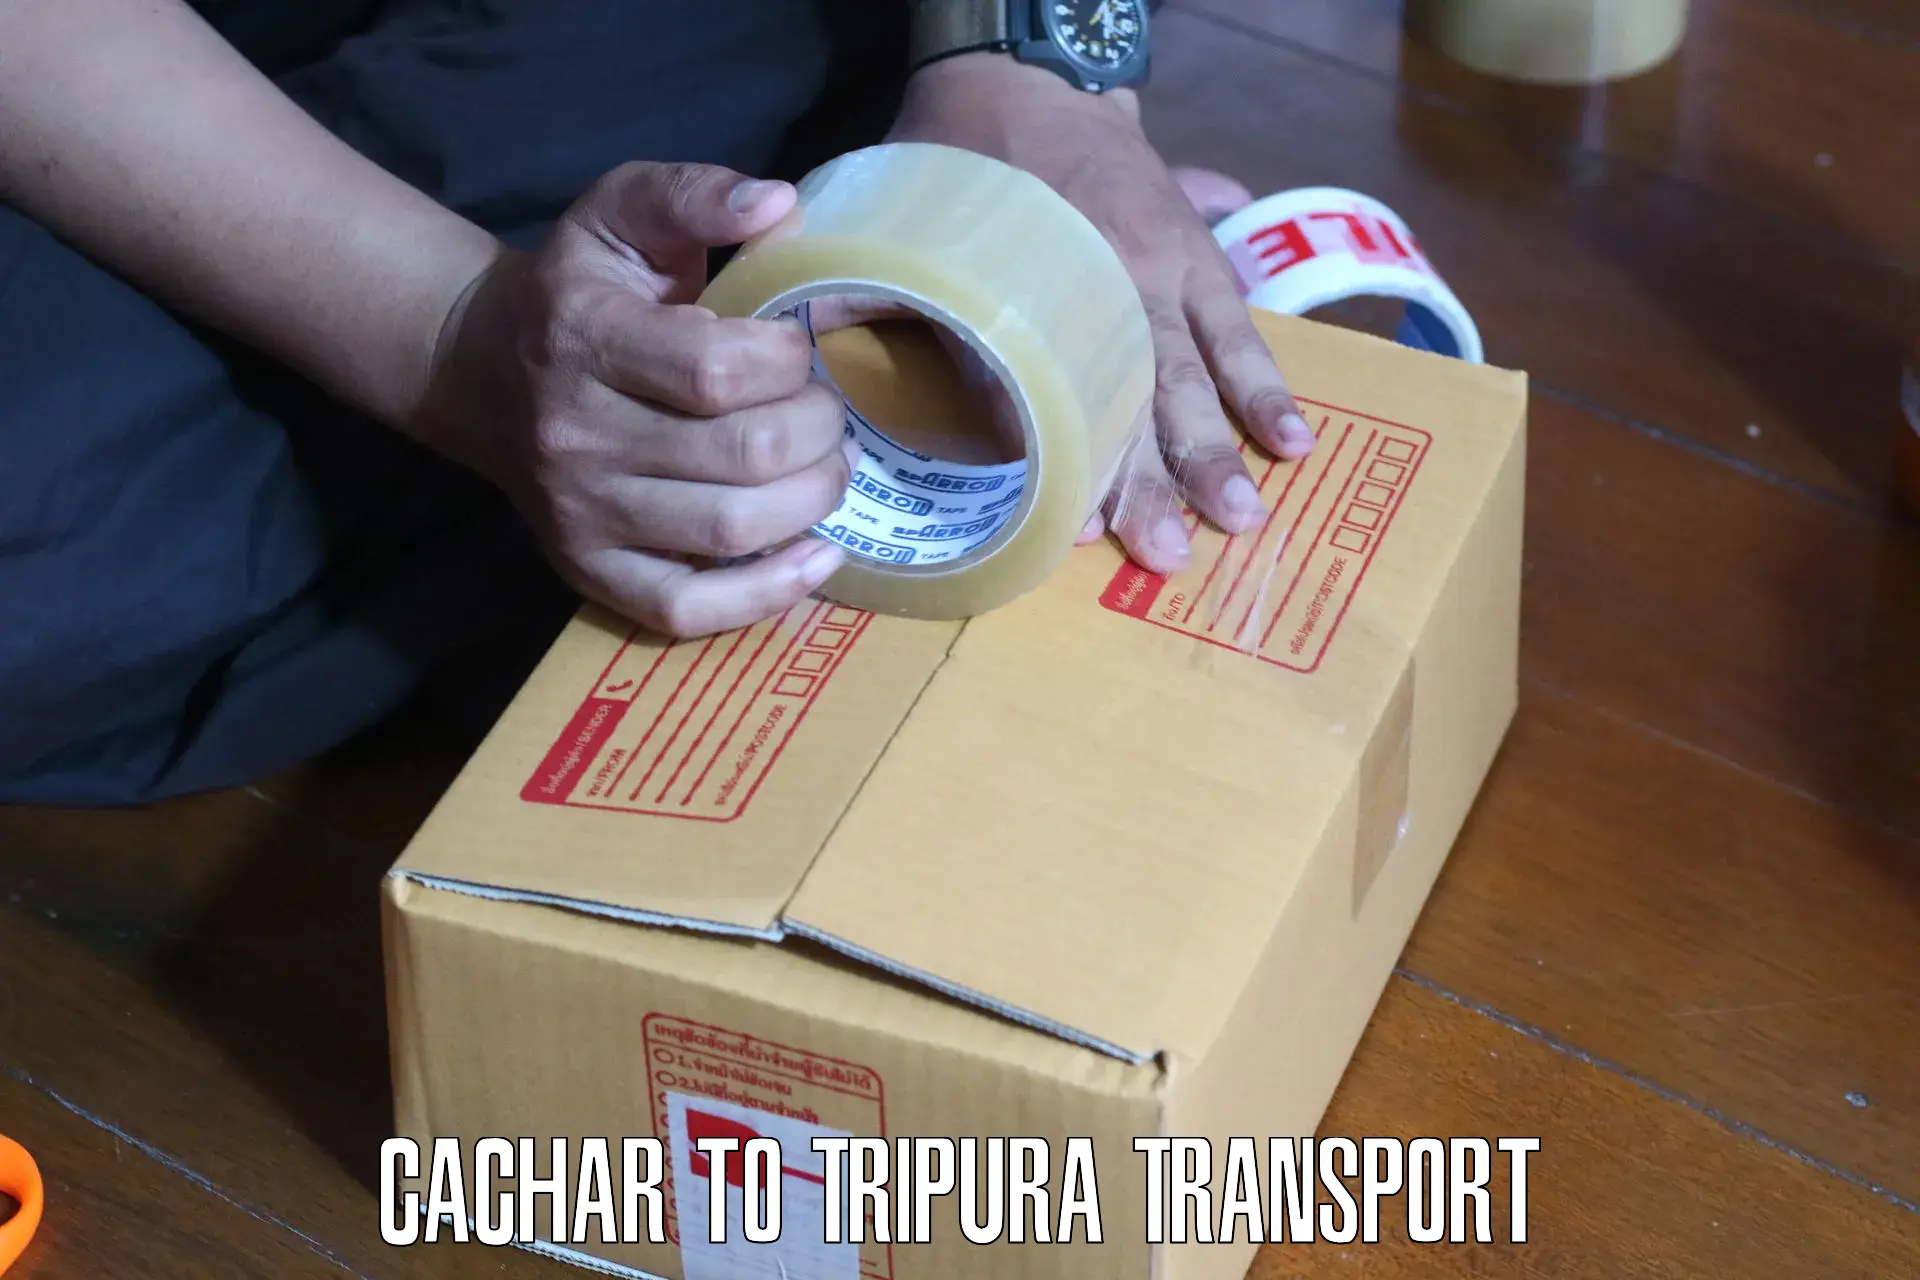 Truck transport companies in India Cachar to Kailashahar